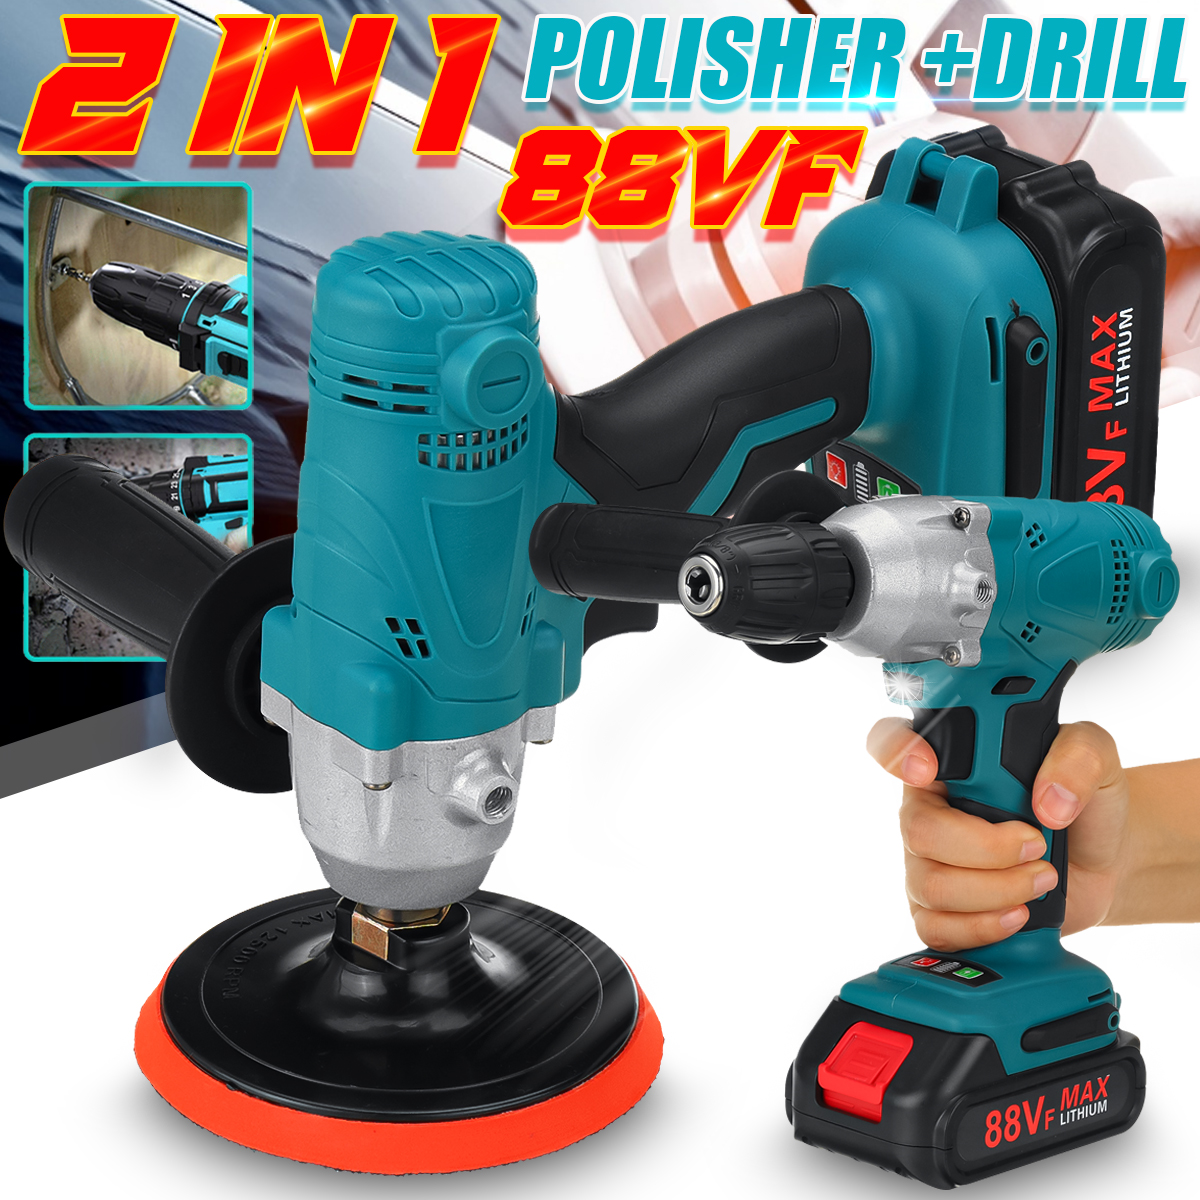 2-In-1-Polisher-Drill-Cordless-Electric-Drilling-Polishing-Machine-Car-Polisher-Power-Tool-Converter-1889909-1